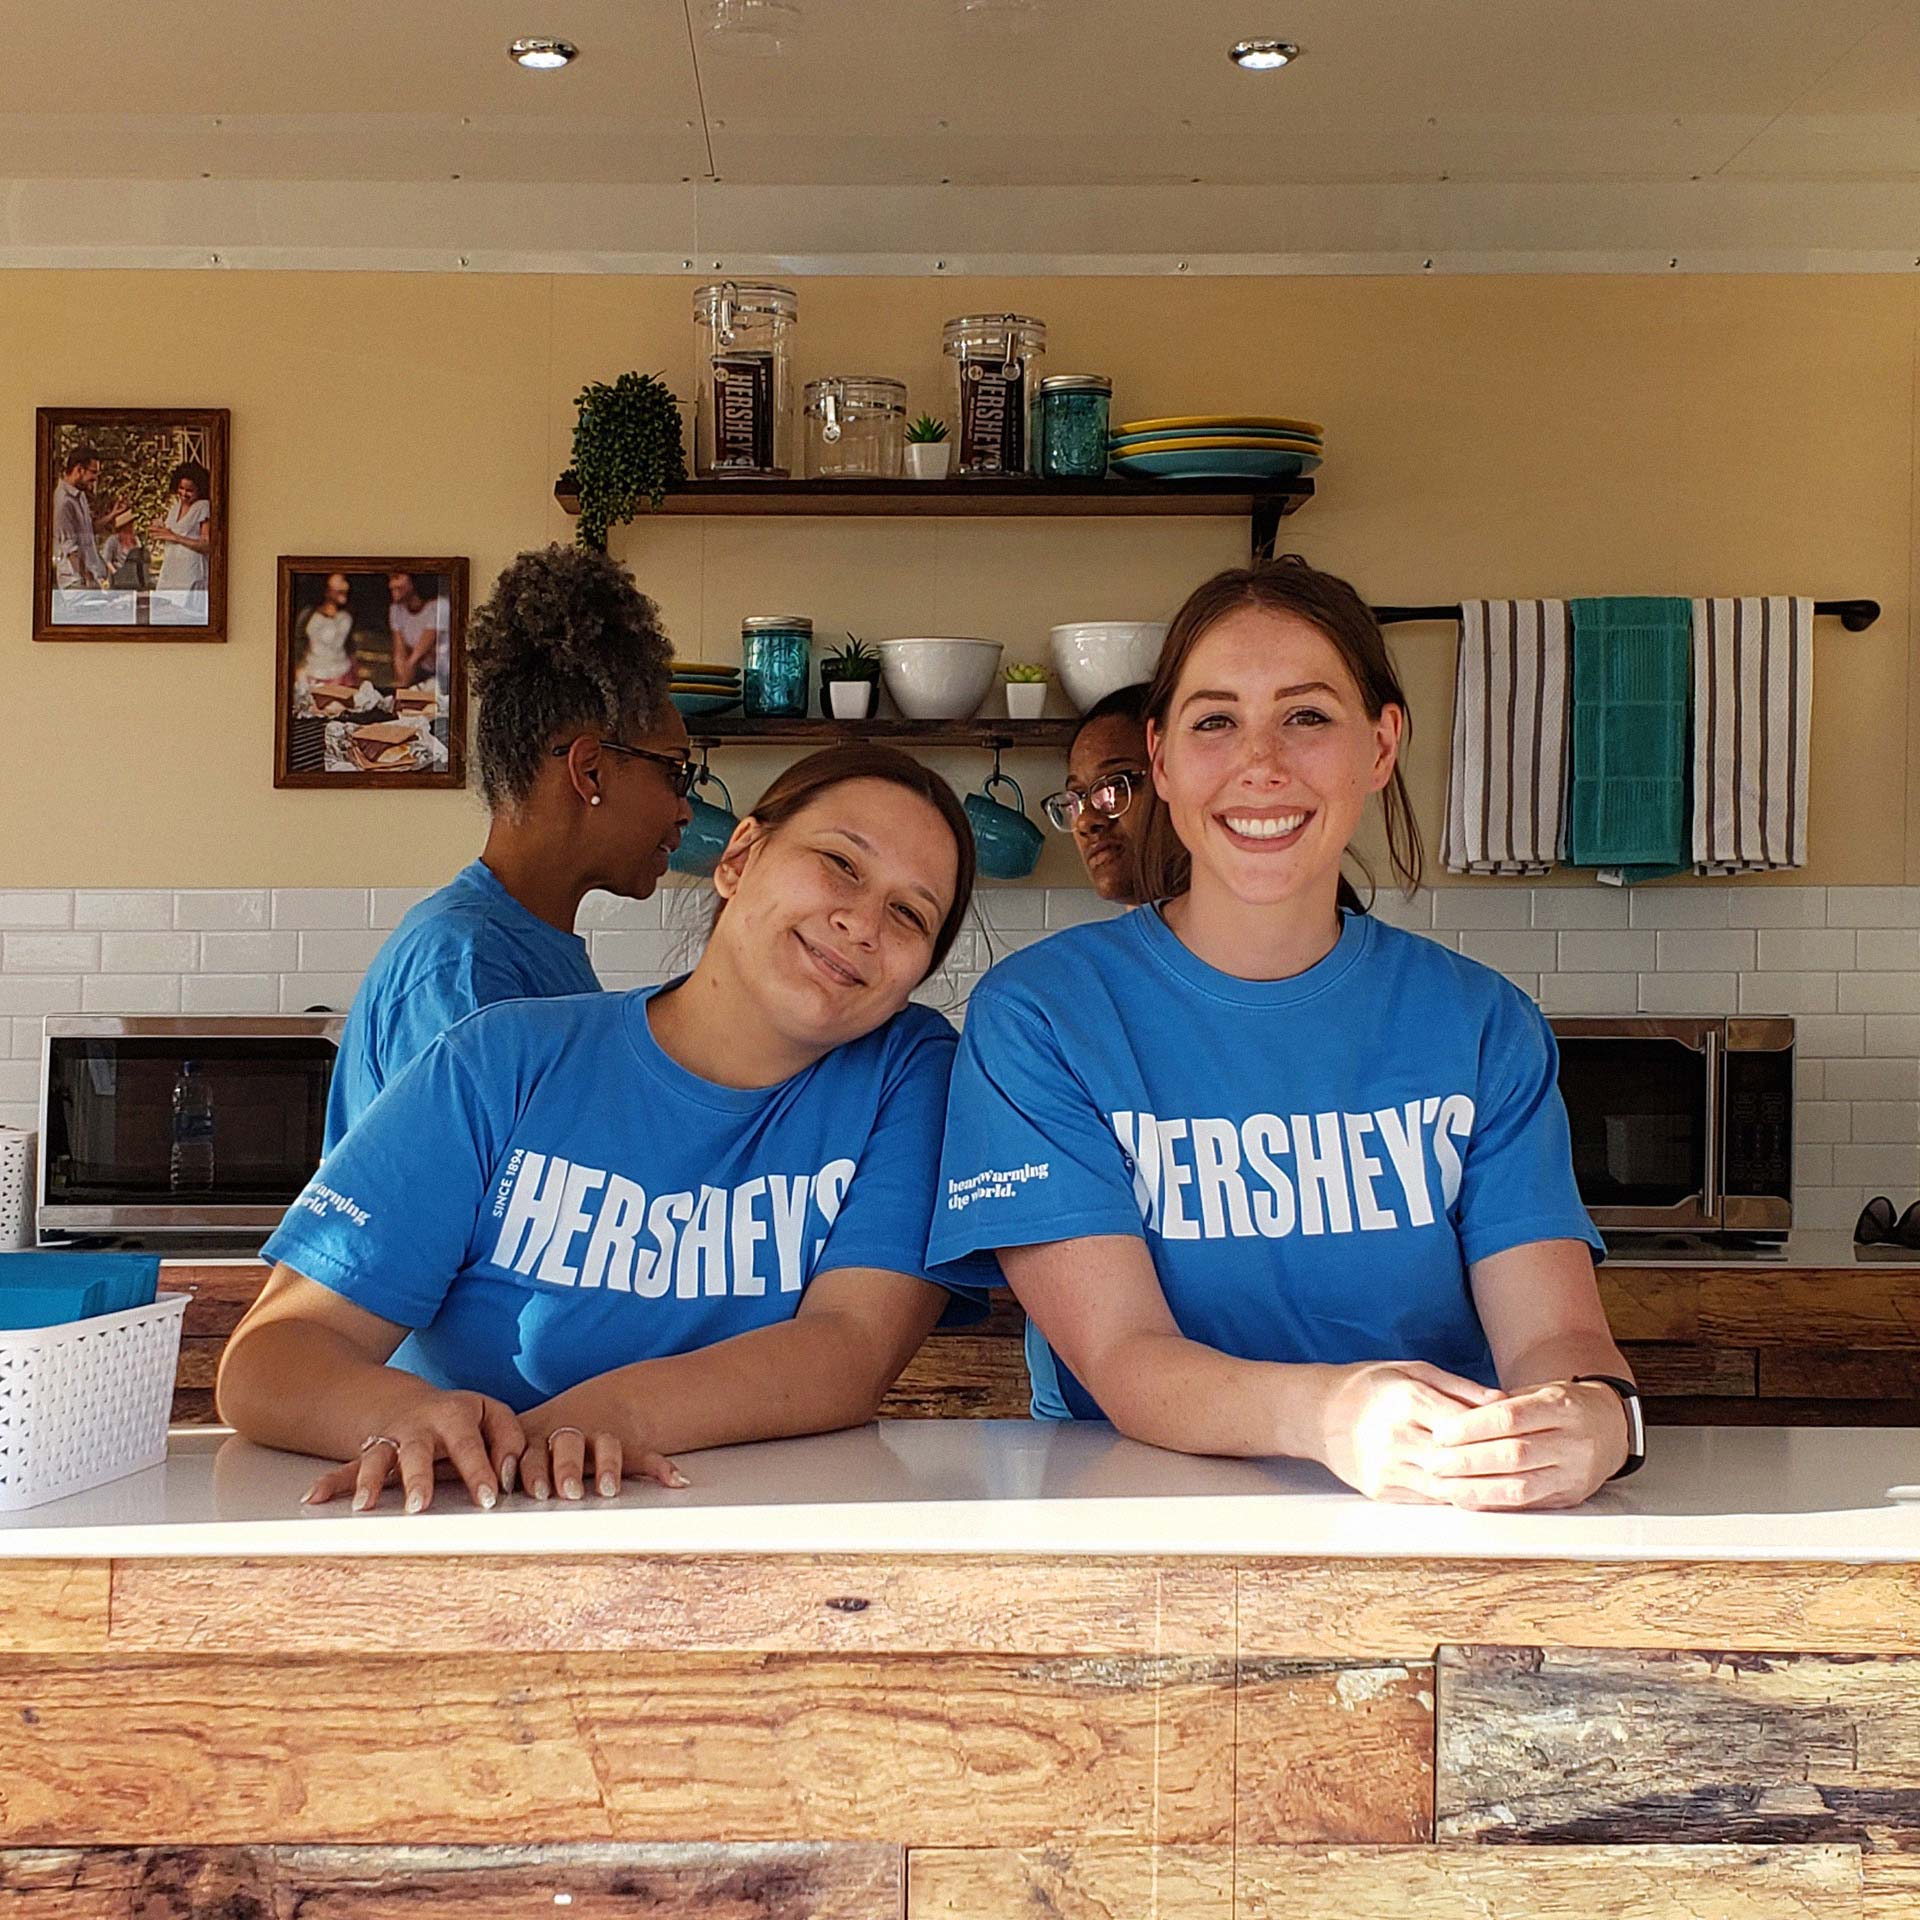 Two female Hershey's brand ambassadors smiling behind the counter